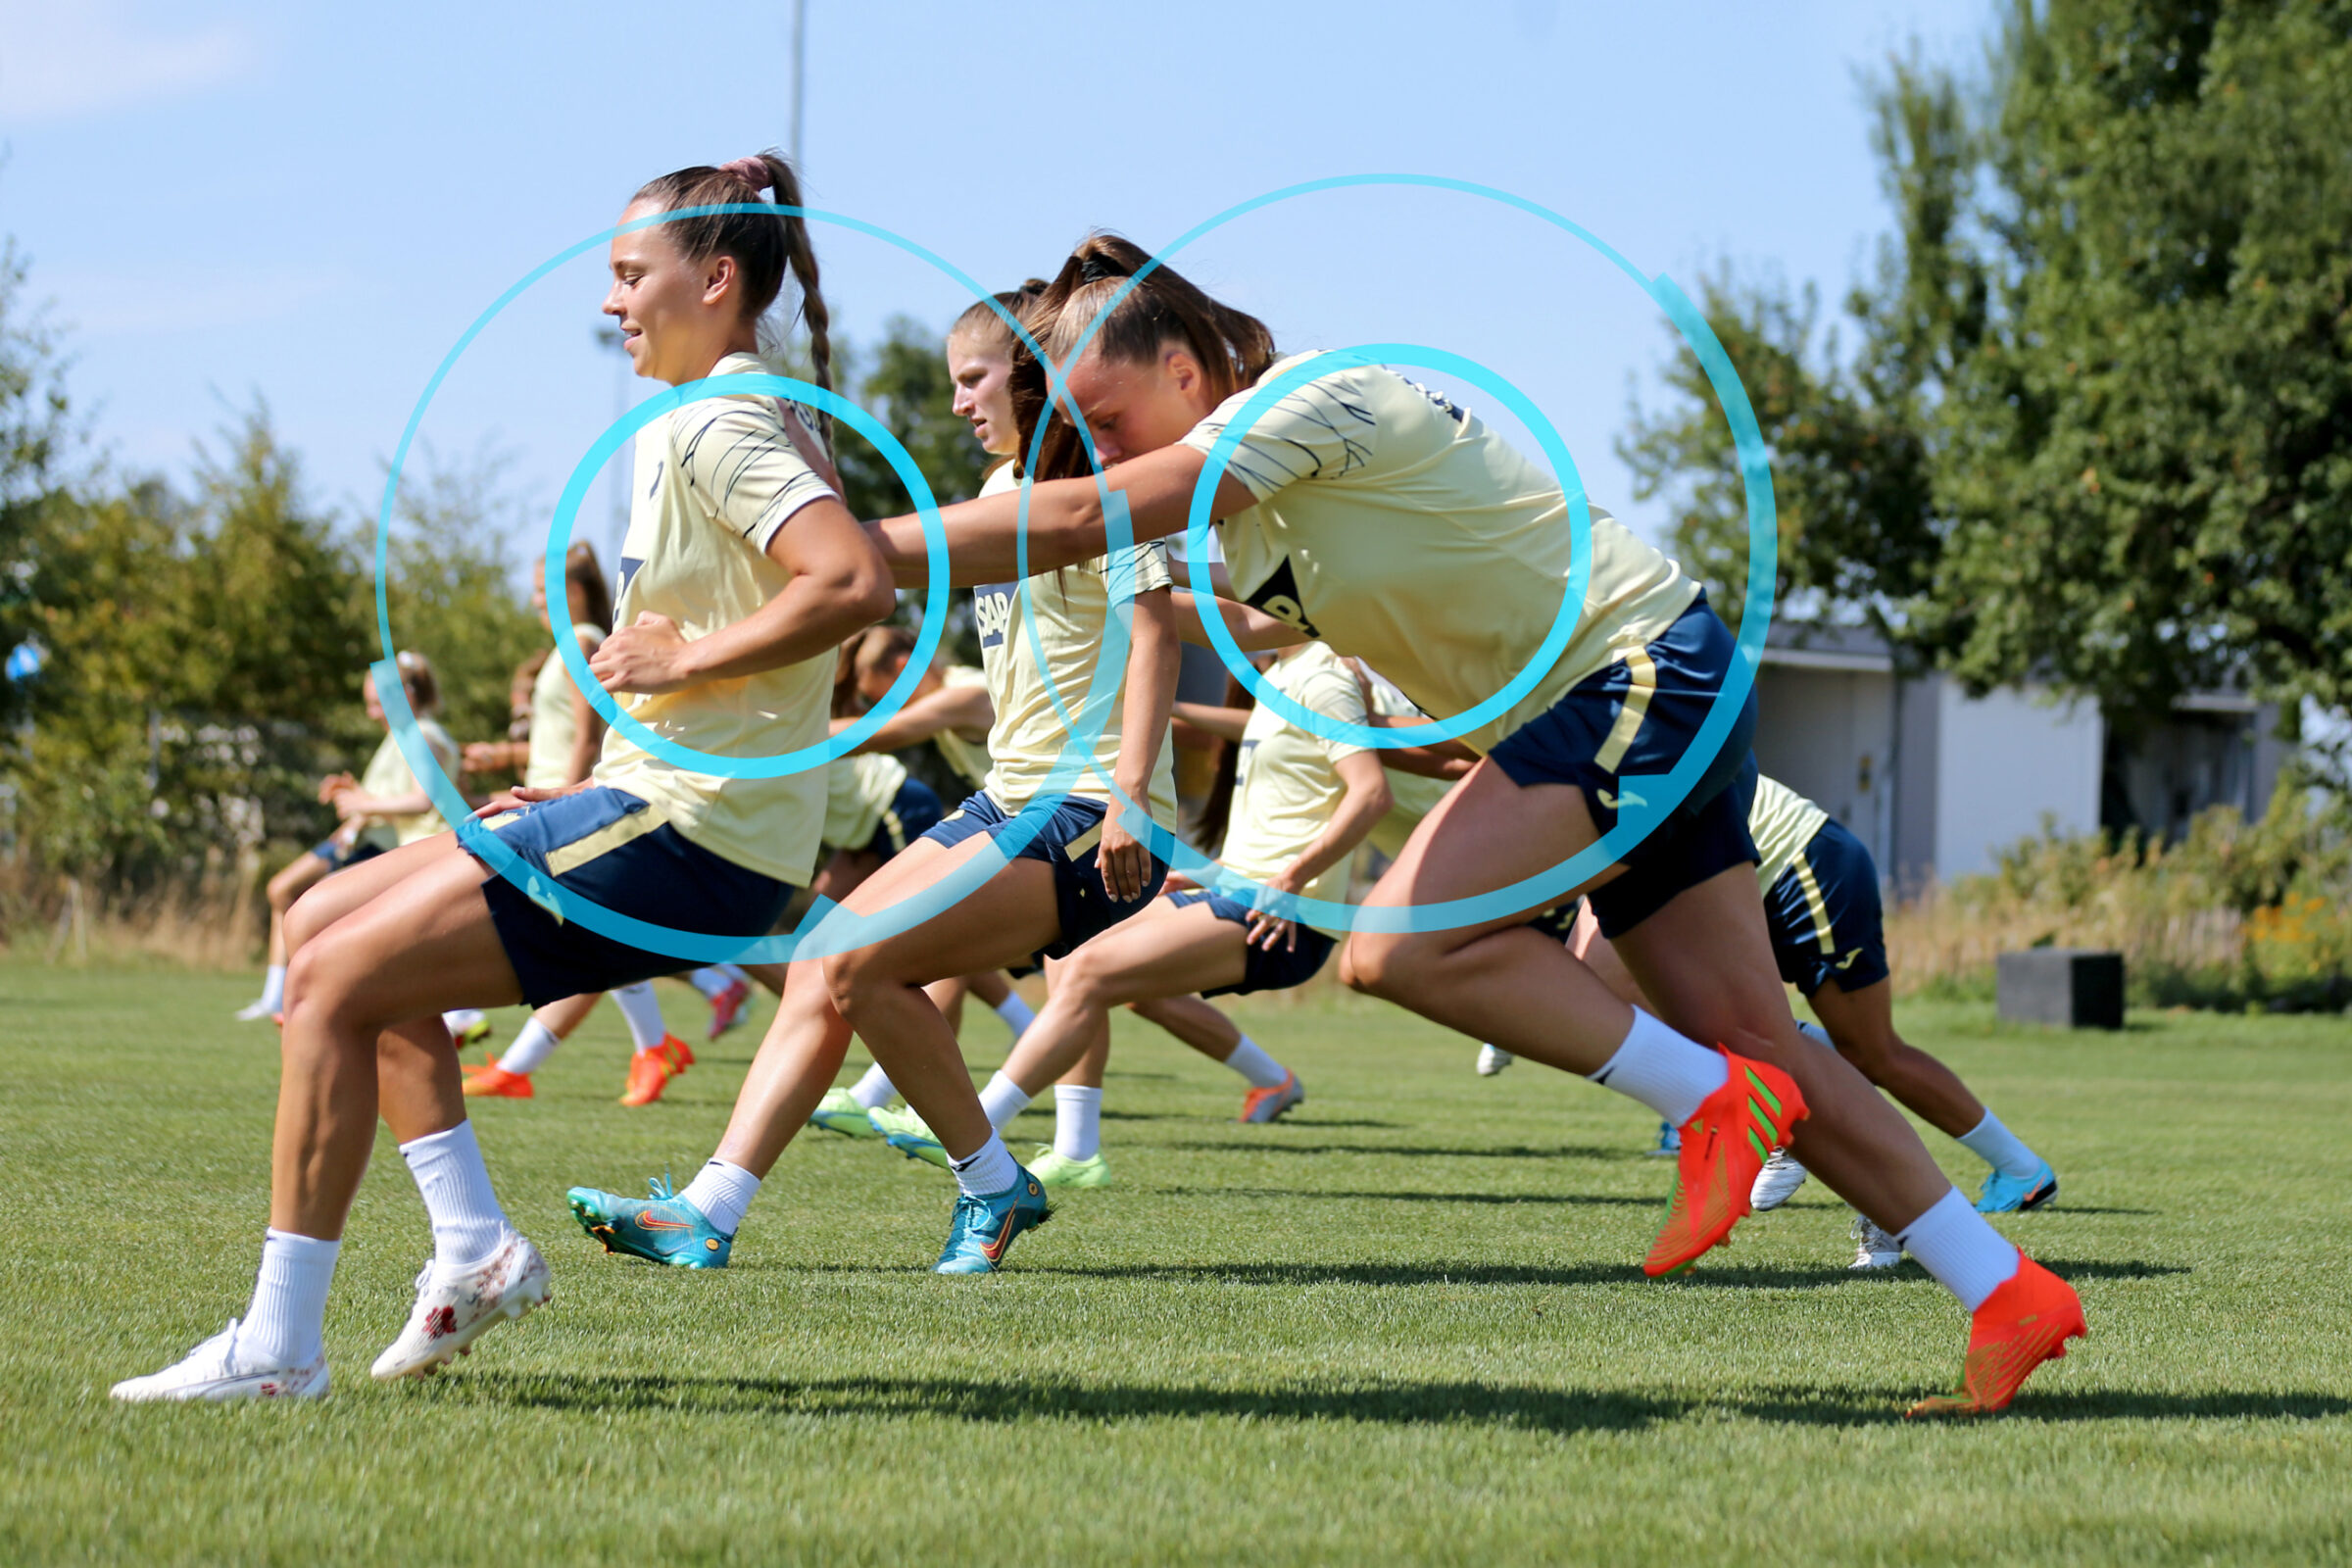 Women's football is one of the many sports using technology to develop sports performance training regimens for women.